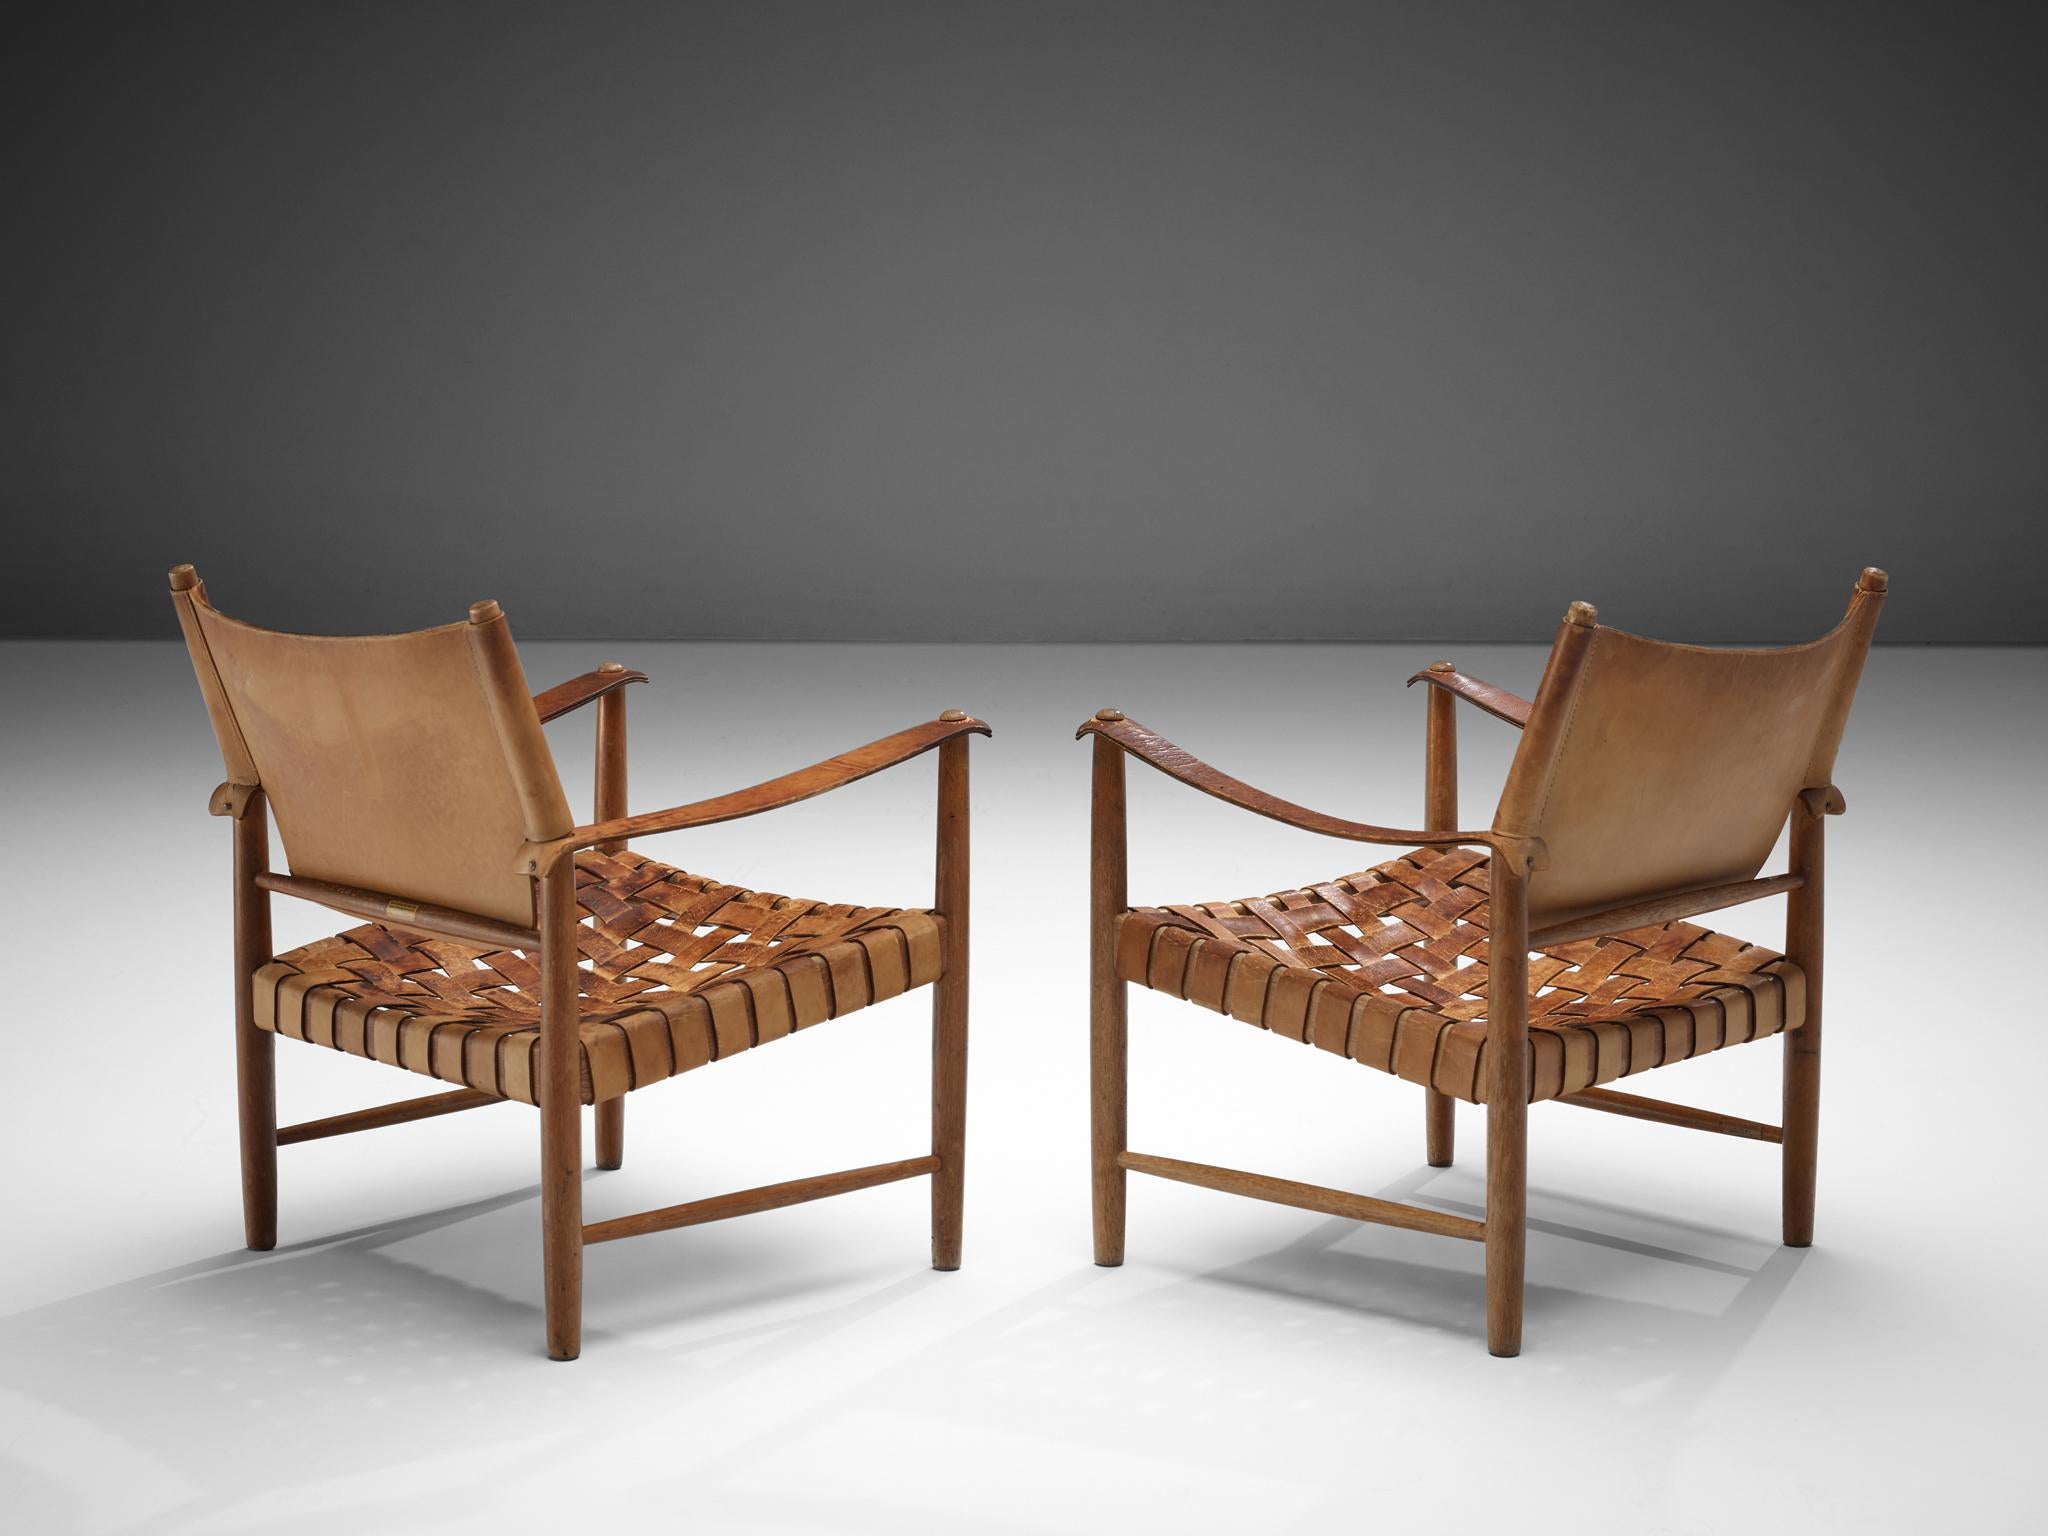 Pair of Danish safari chairs, patinated leather, oak, Denmark, 1950s. 

This elegant set safari chairs features wonderful patinated leather on both the seat, the arms and back. The patina creates a vibrant look which you can only achieve after years